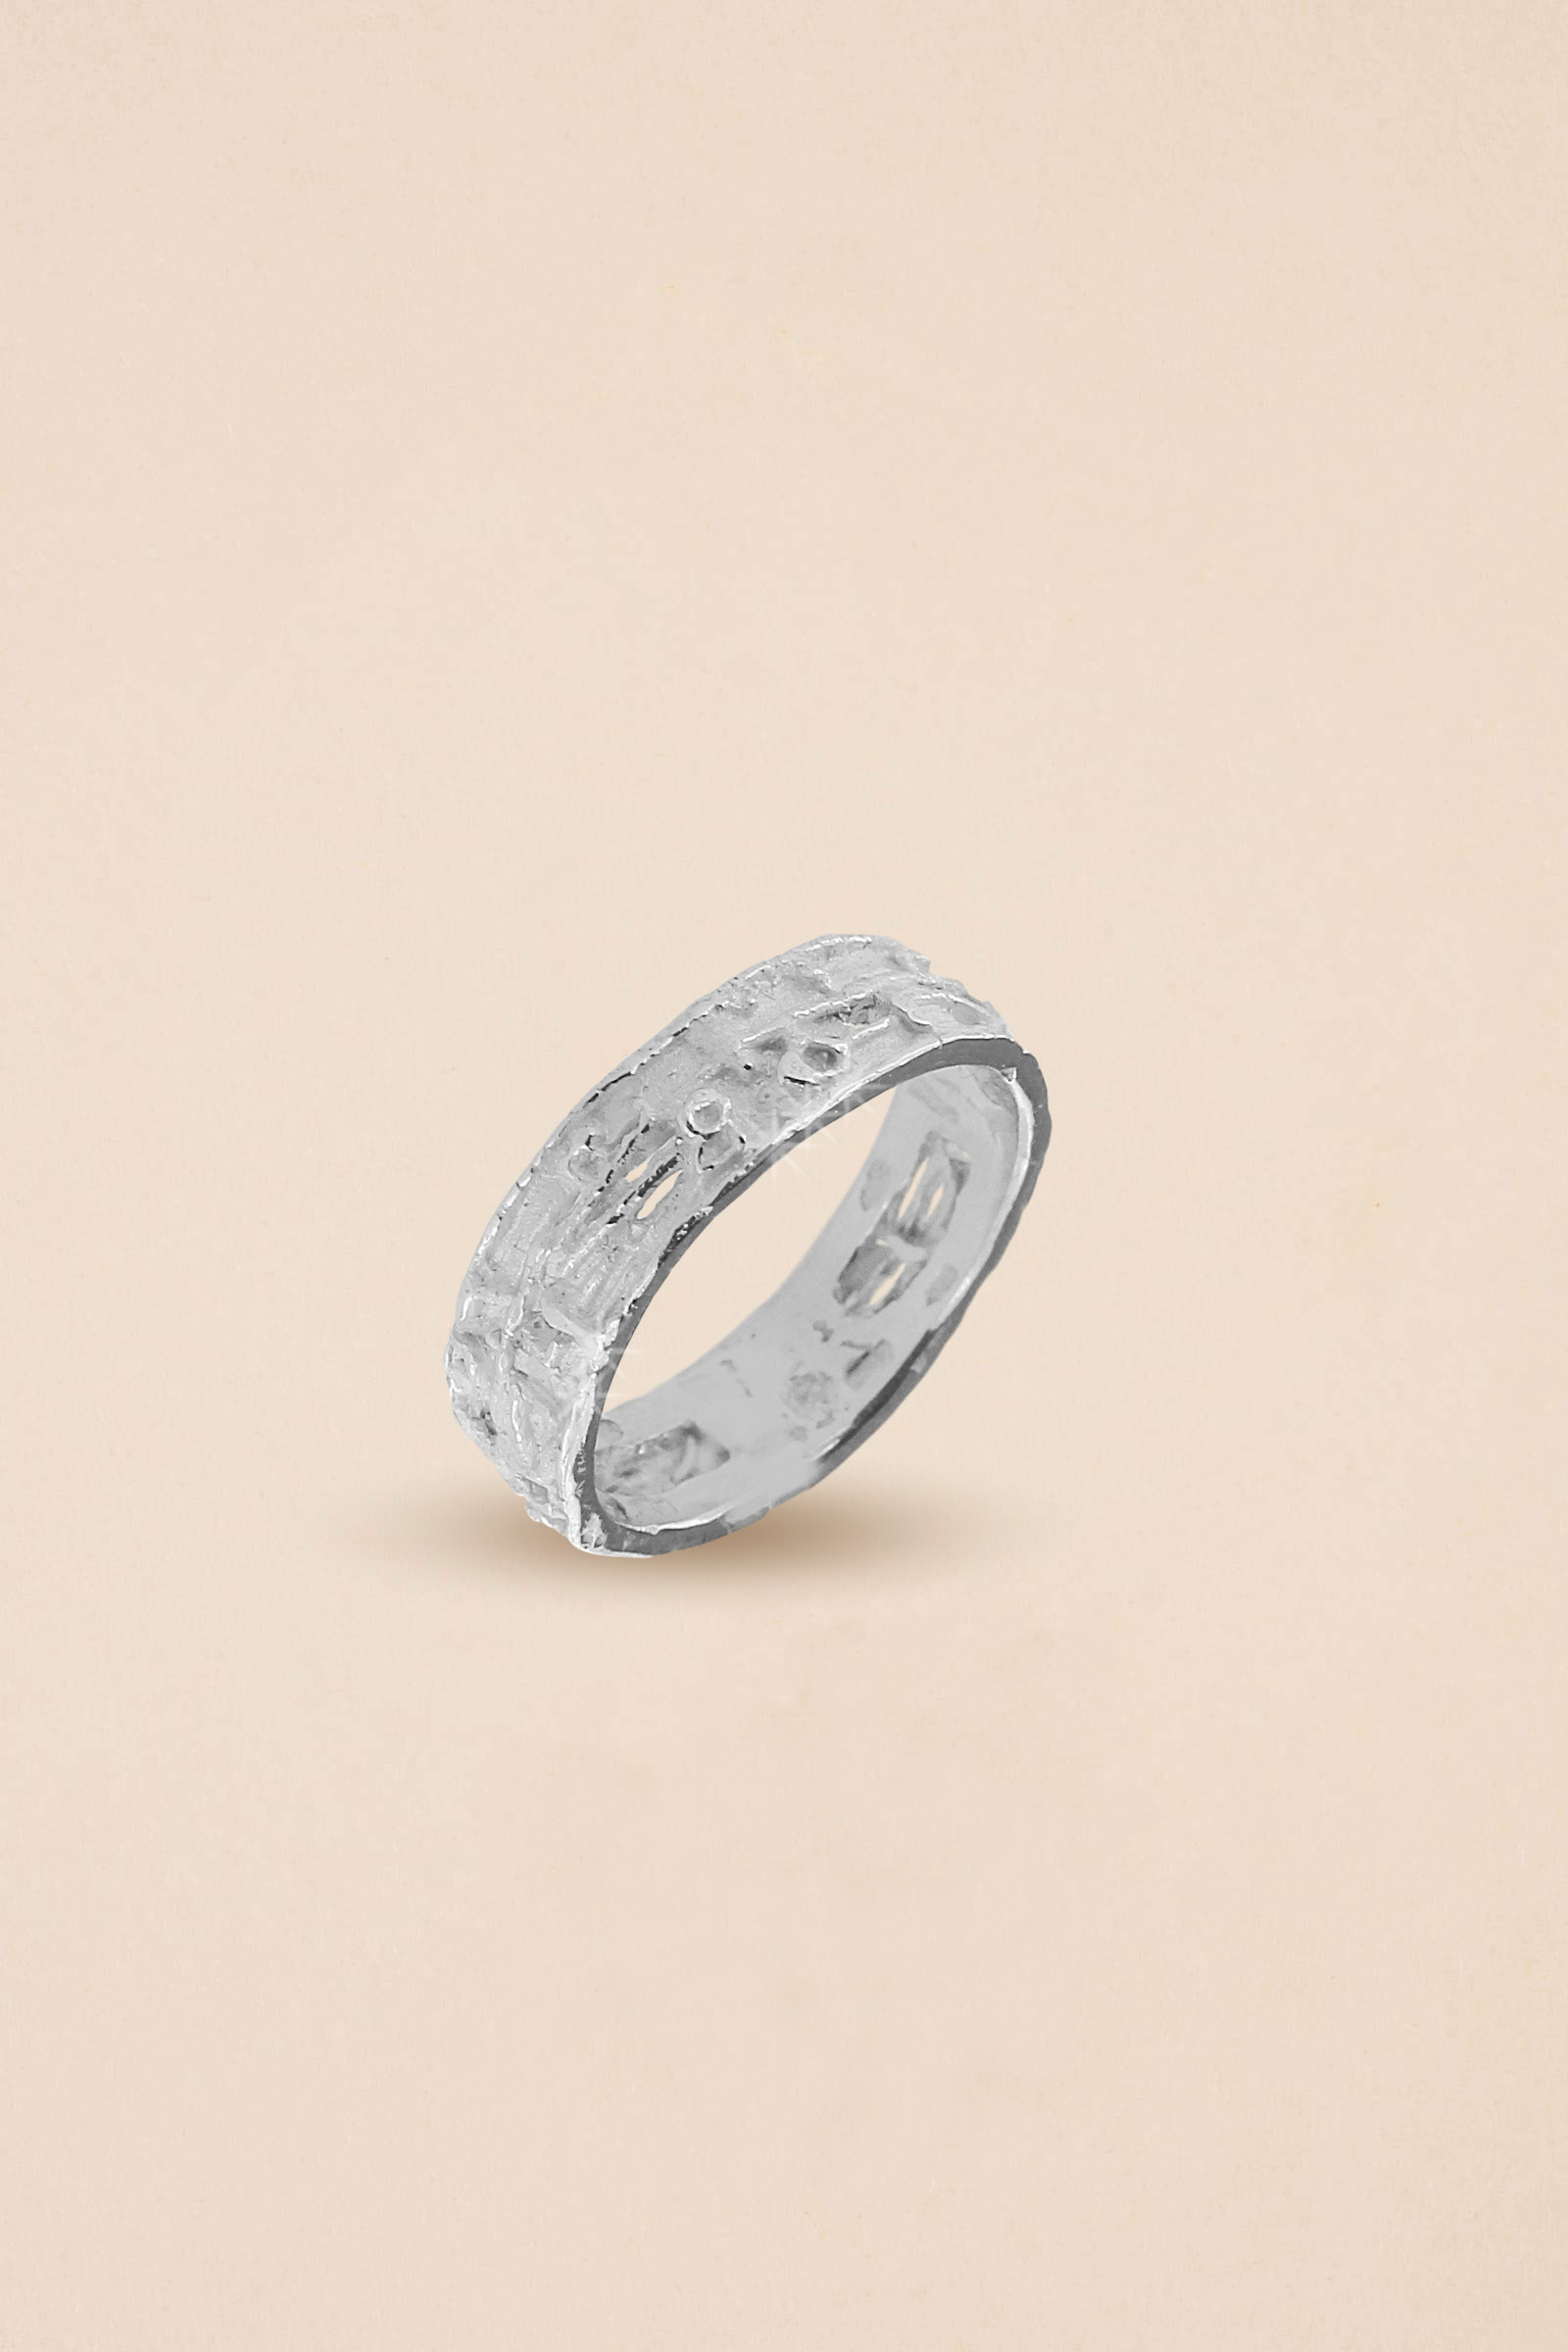 AE154-Sterling-Silver-925-Band-Ring-1